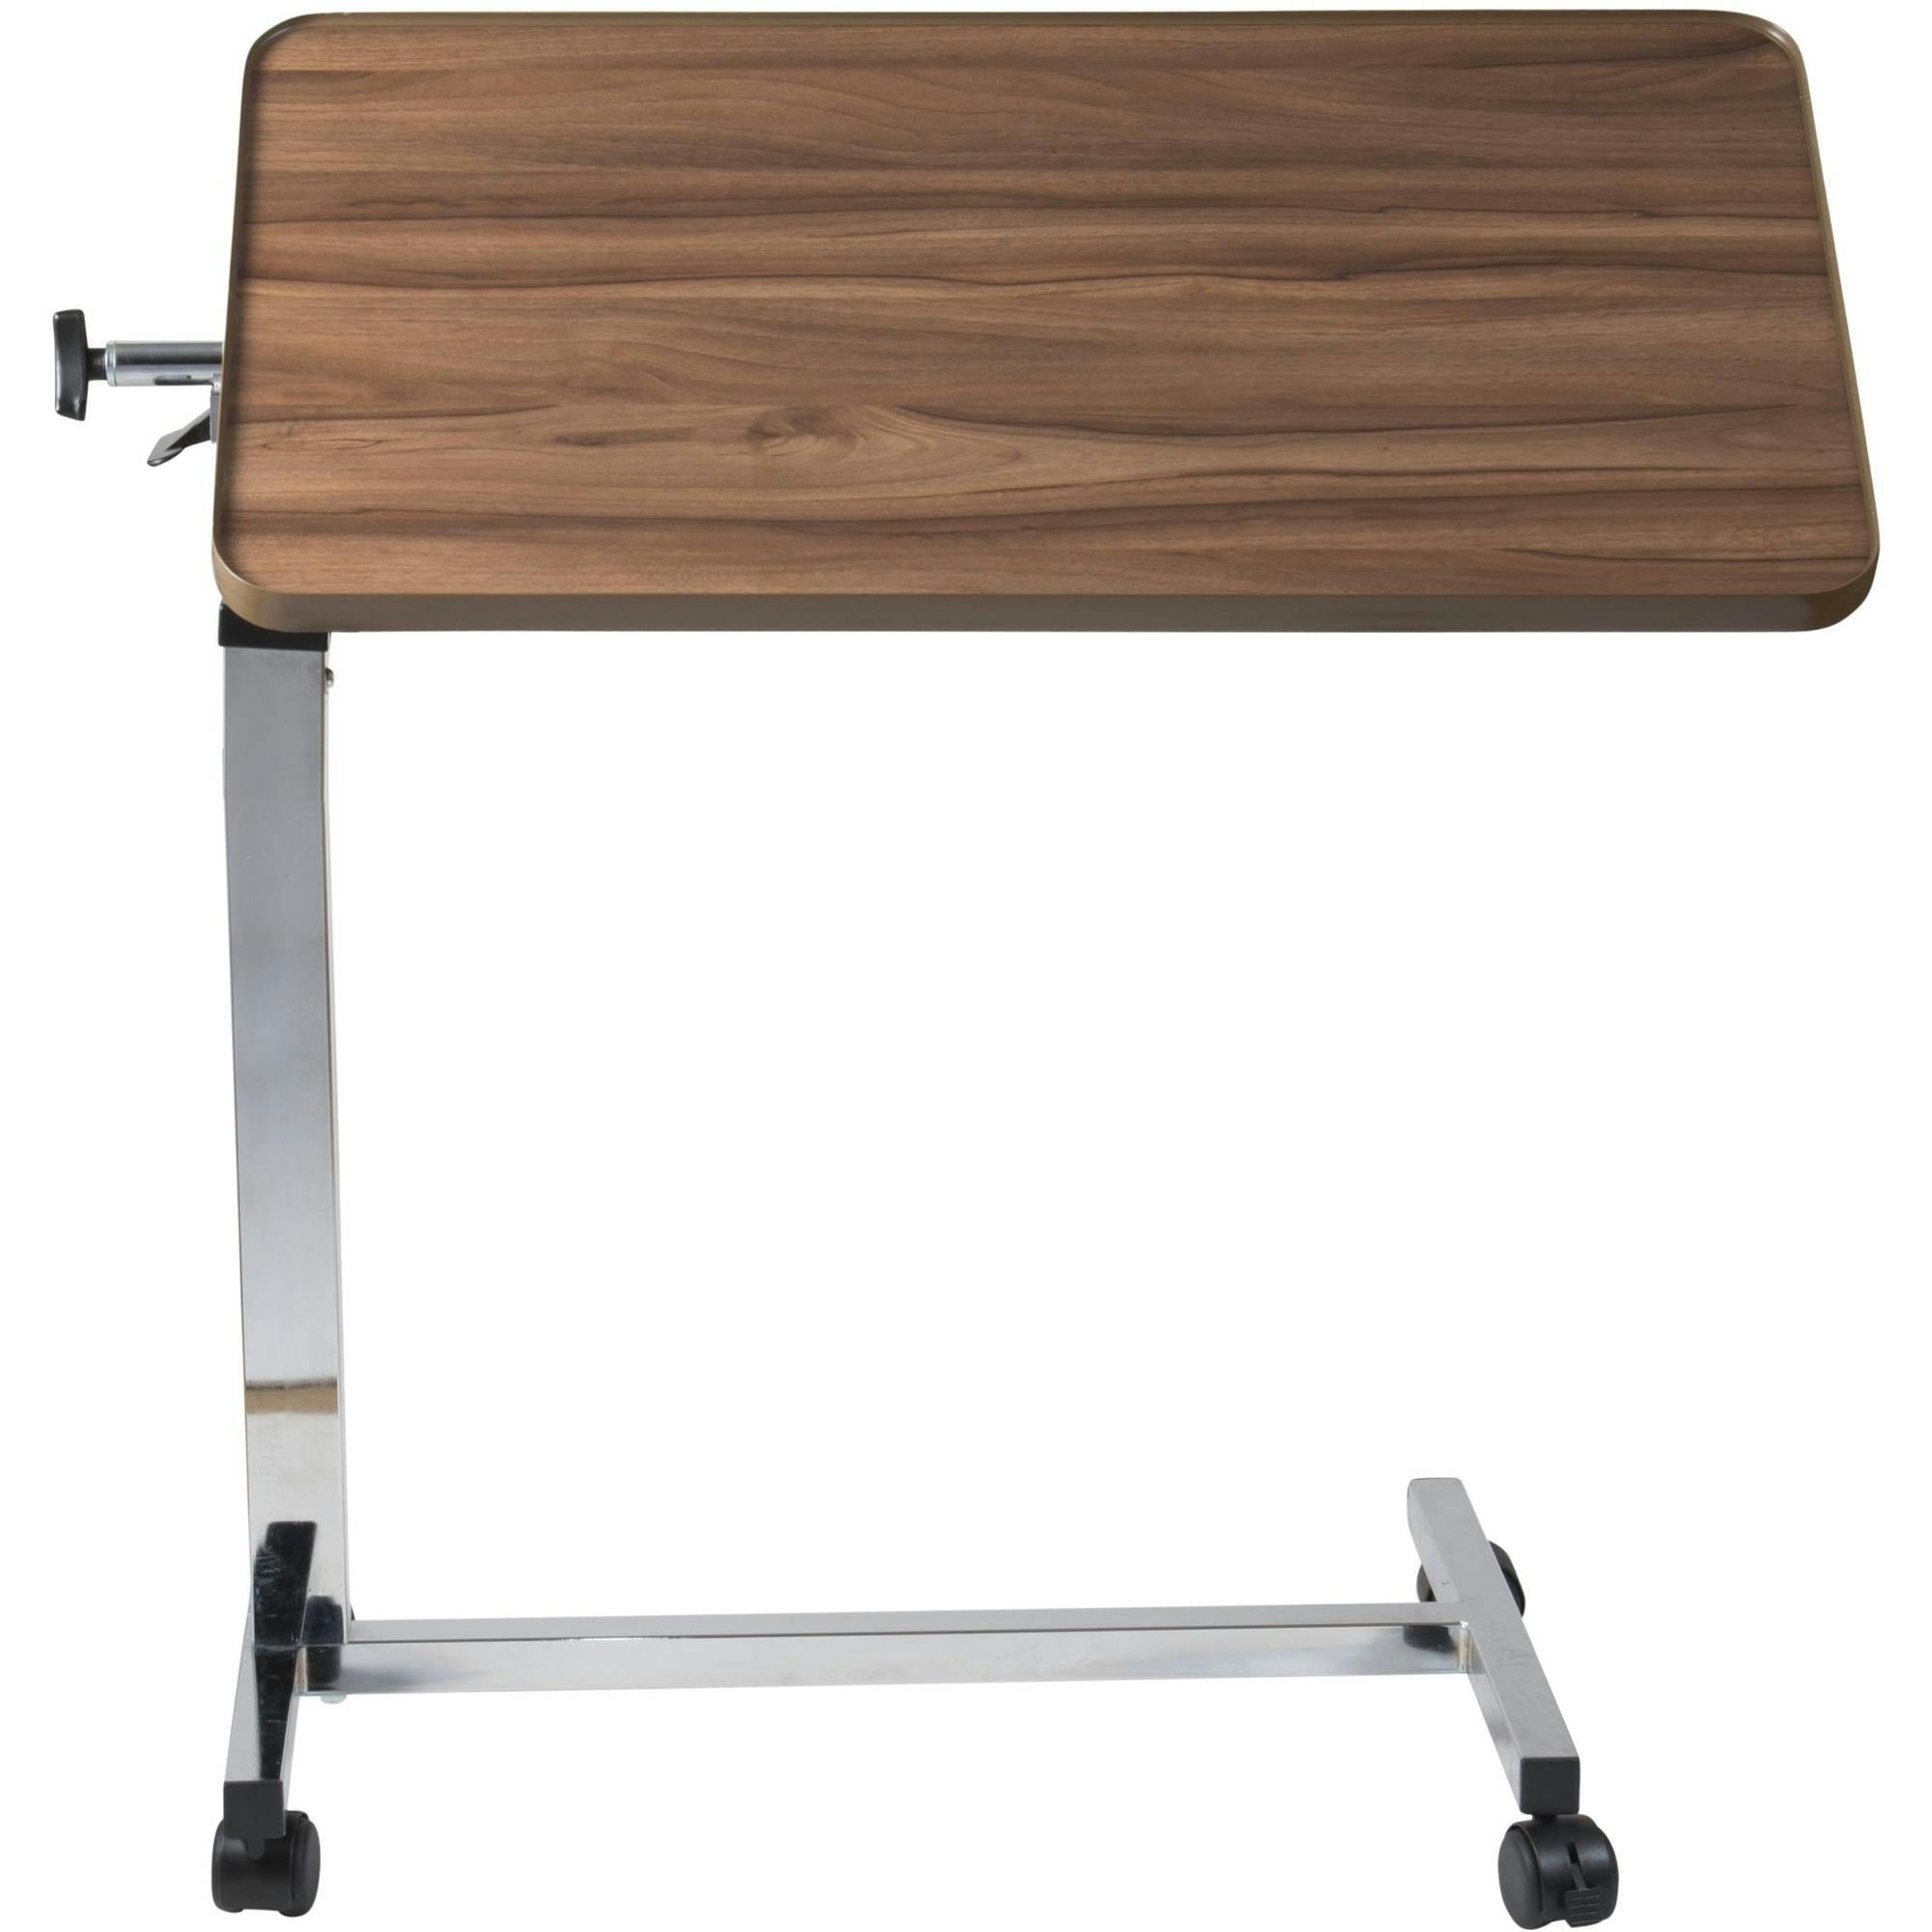 Deluxe Chrome-Plated Steel Tilt-Top Overbed Table with Laminate Top